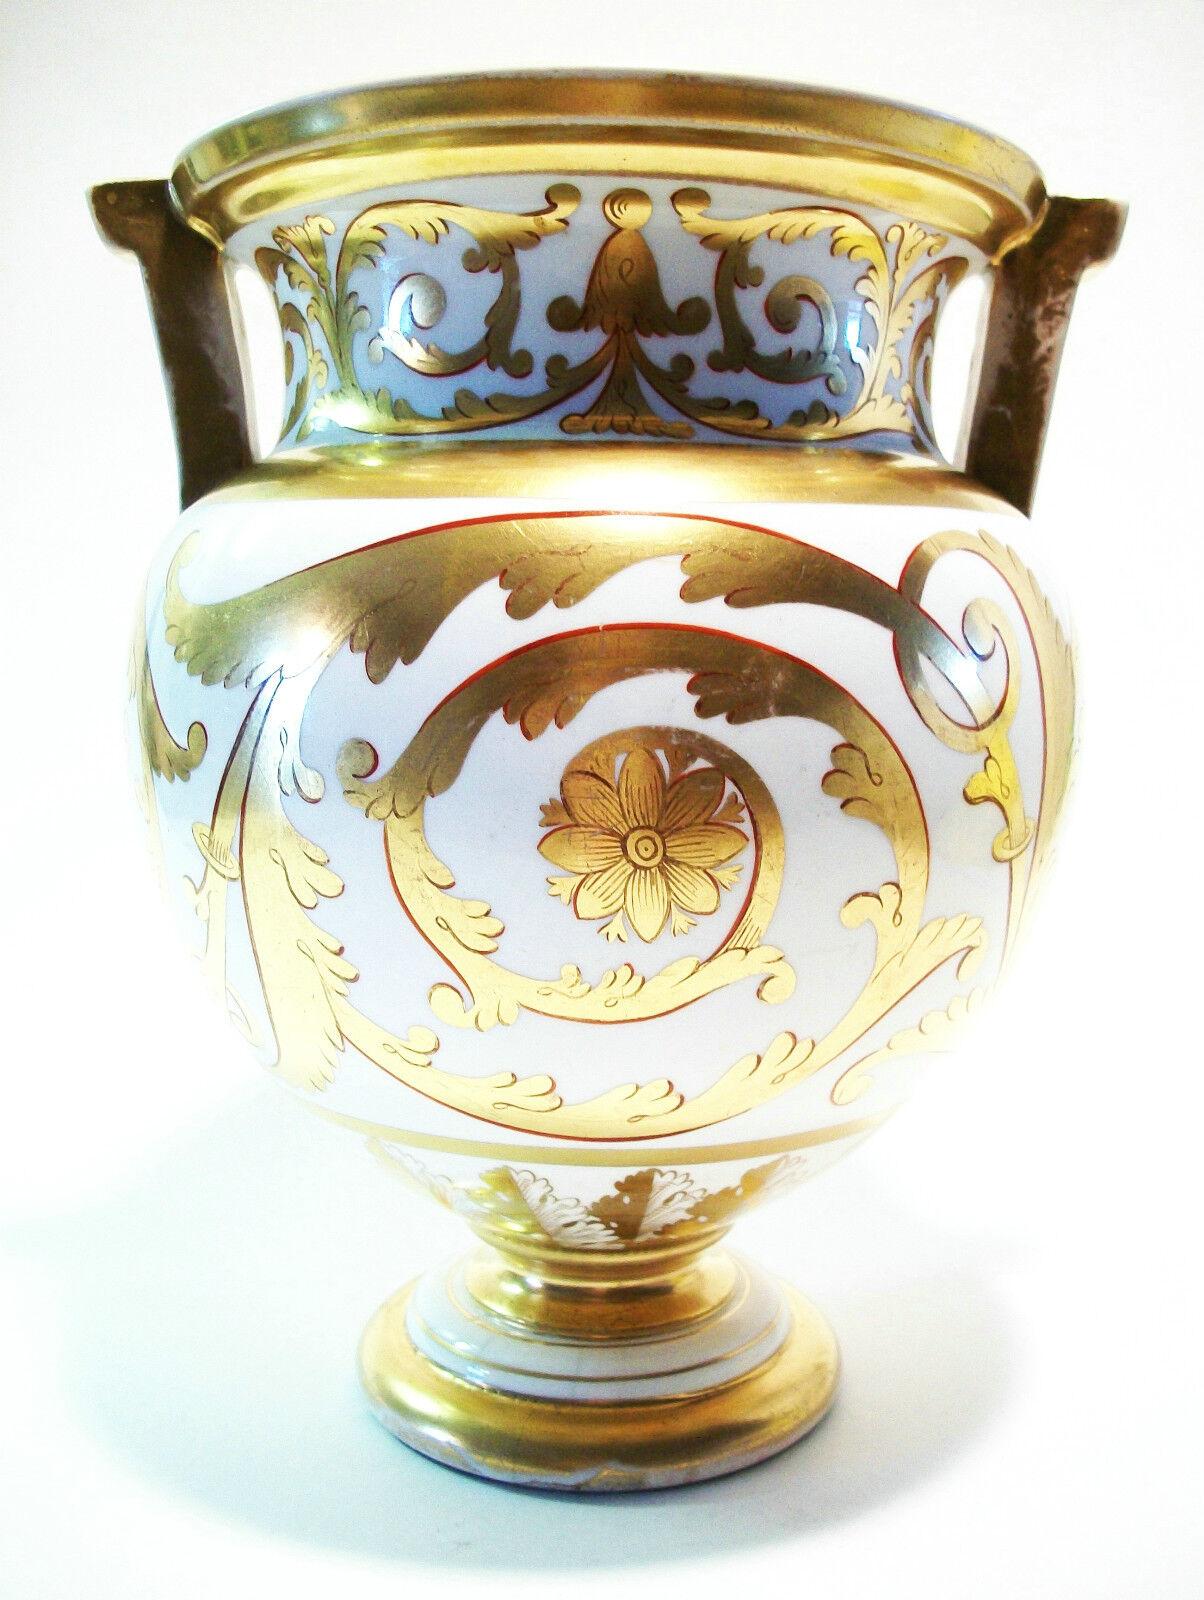 Antique - SPODE - Georgian period - exceptional and rare - twin handled gilded porcelain large 'Low Scent Jar' - decorated with pattern number 671 - unsigned - illustrated on page 28 of Spode by Robert Copeland - the shape is also illustrated in the